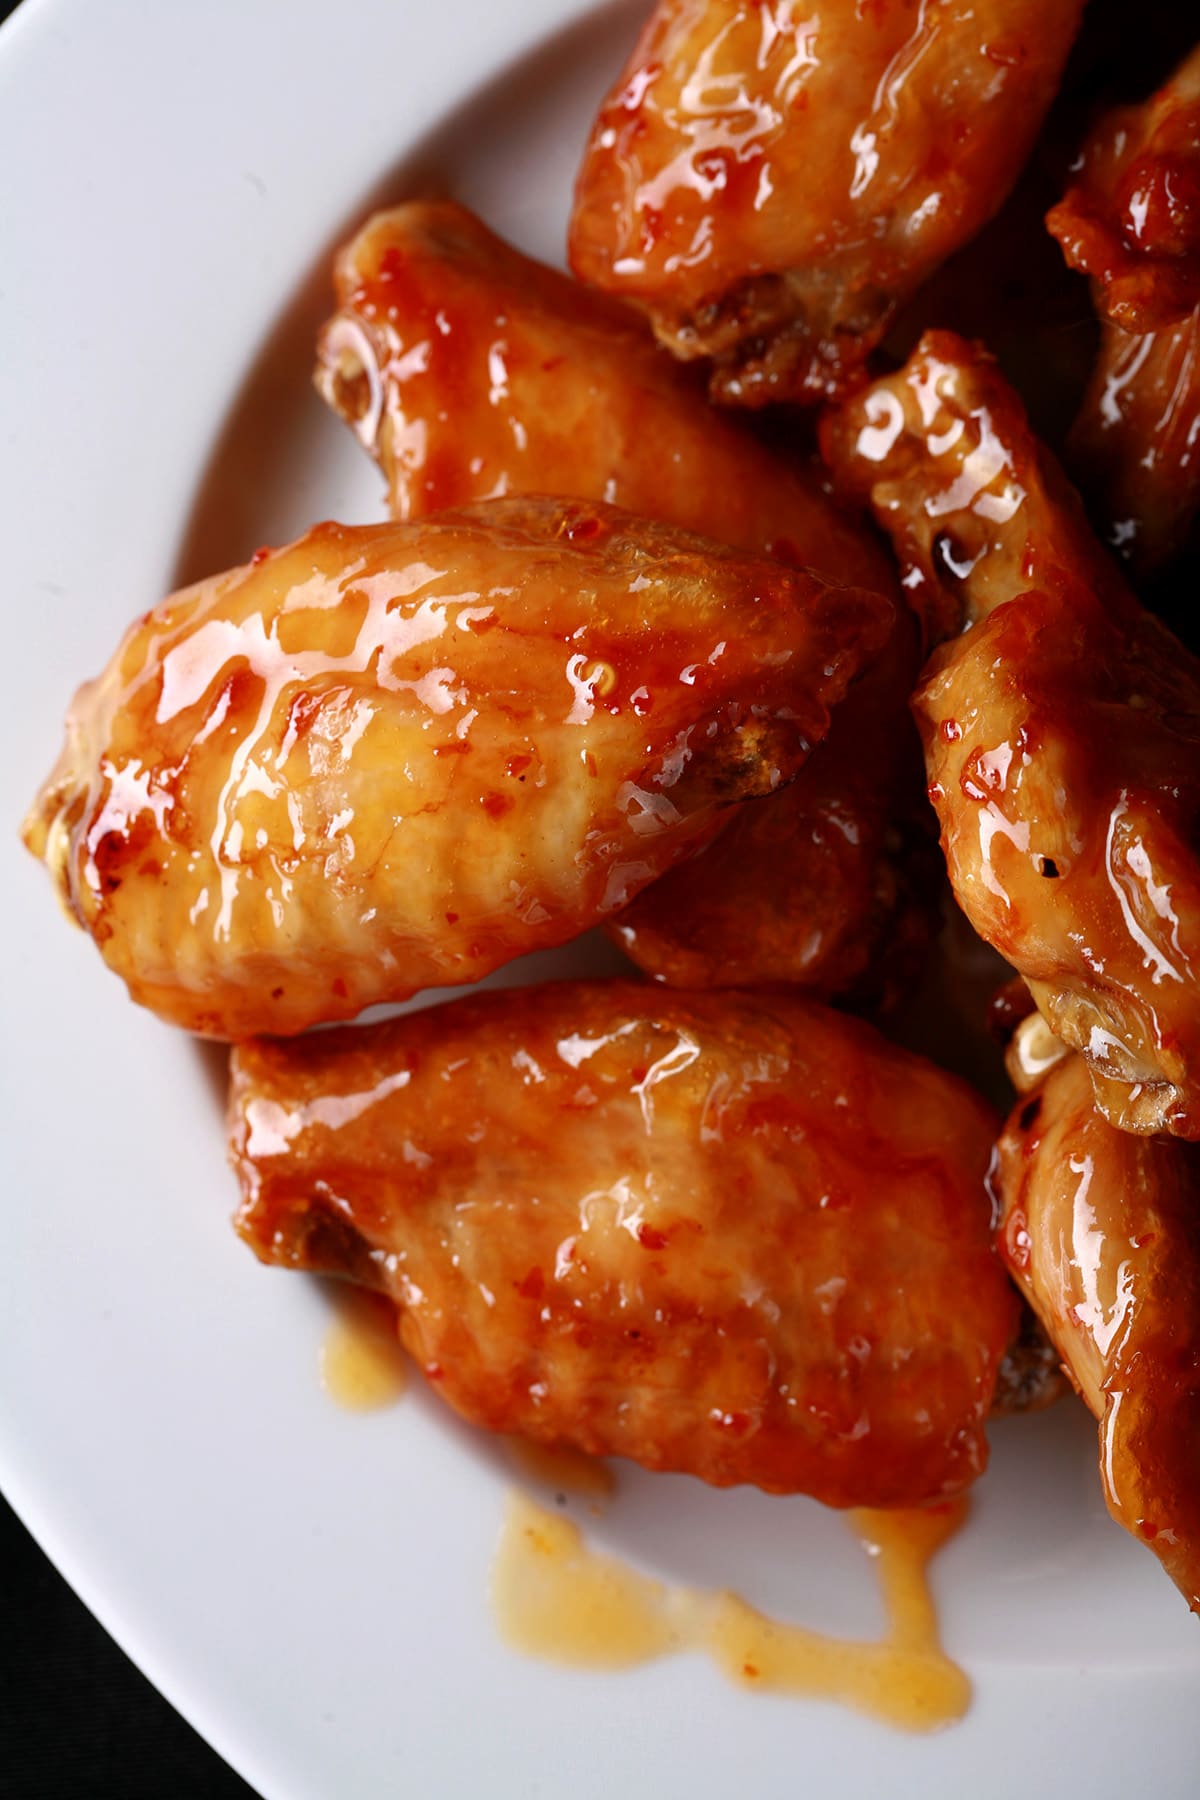 A large white plate piled with fried honey jeow glazed wings - a reddish sauce.